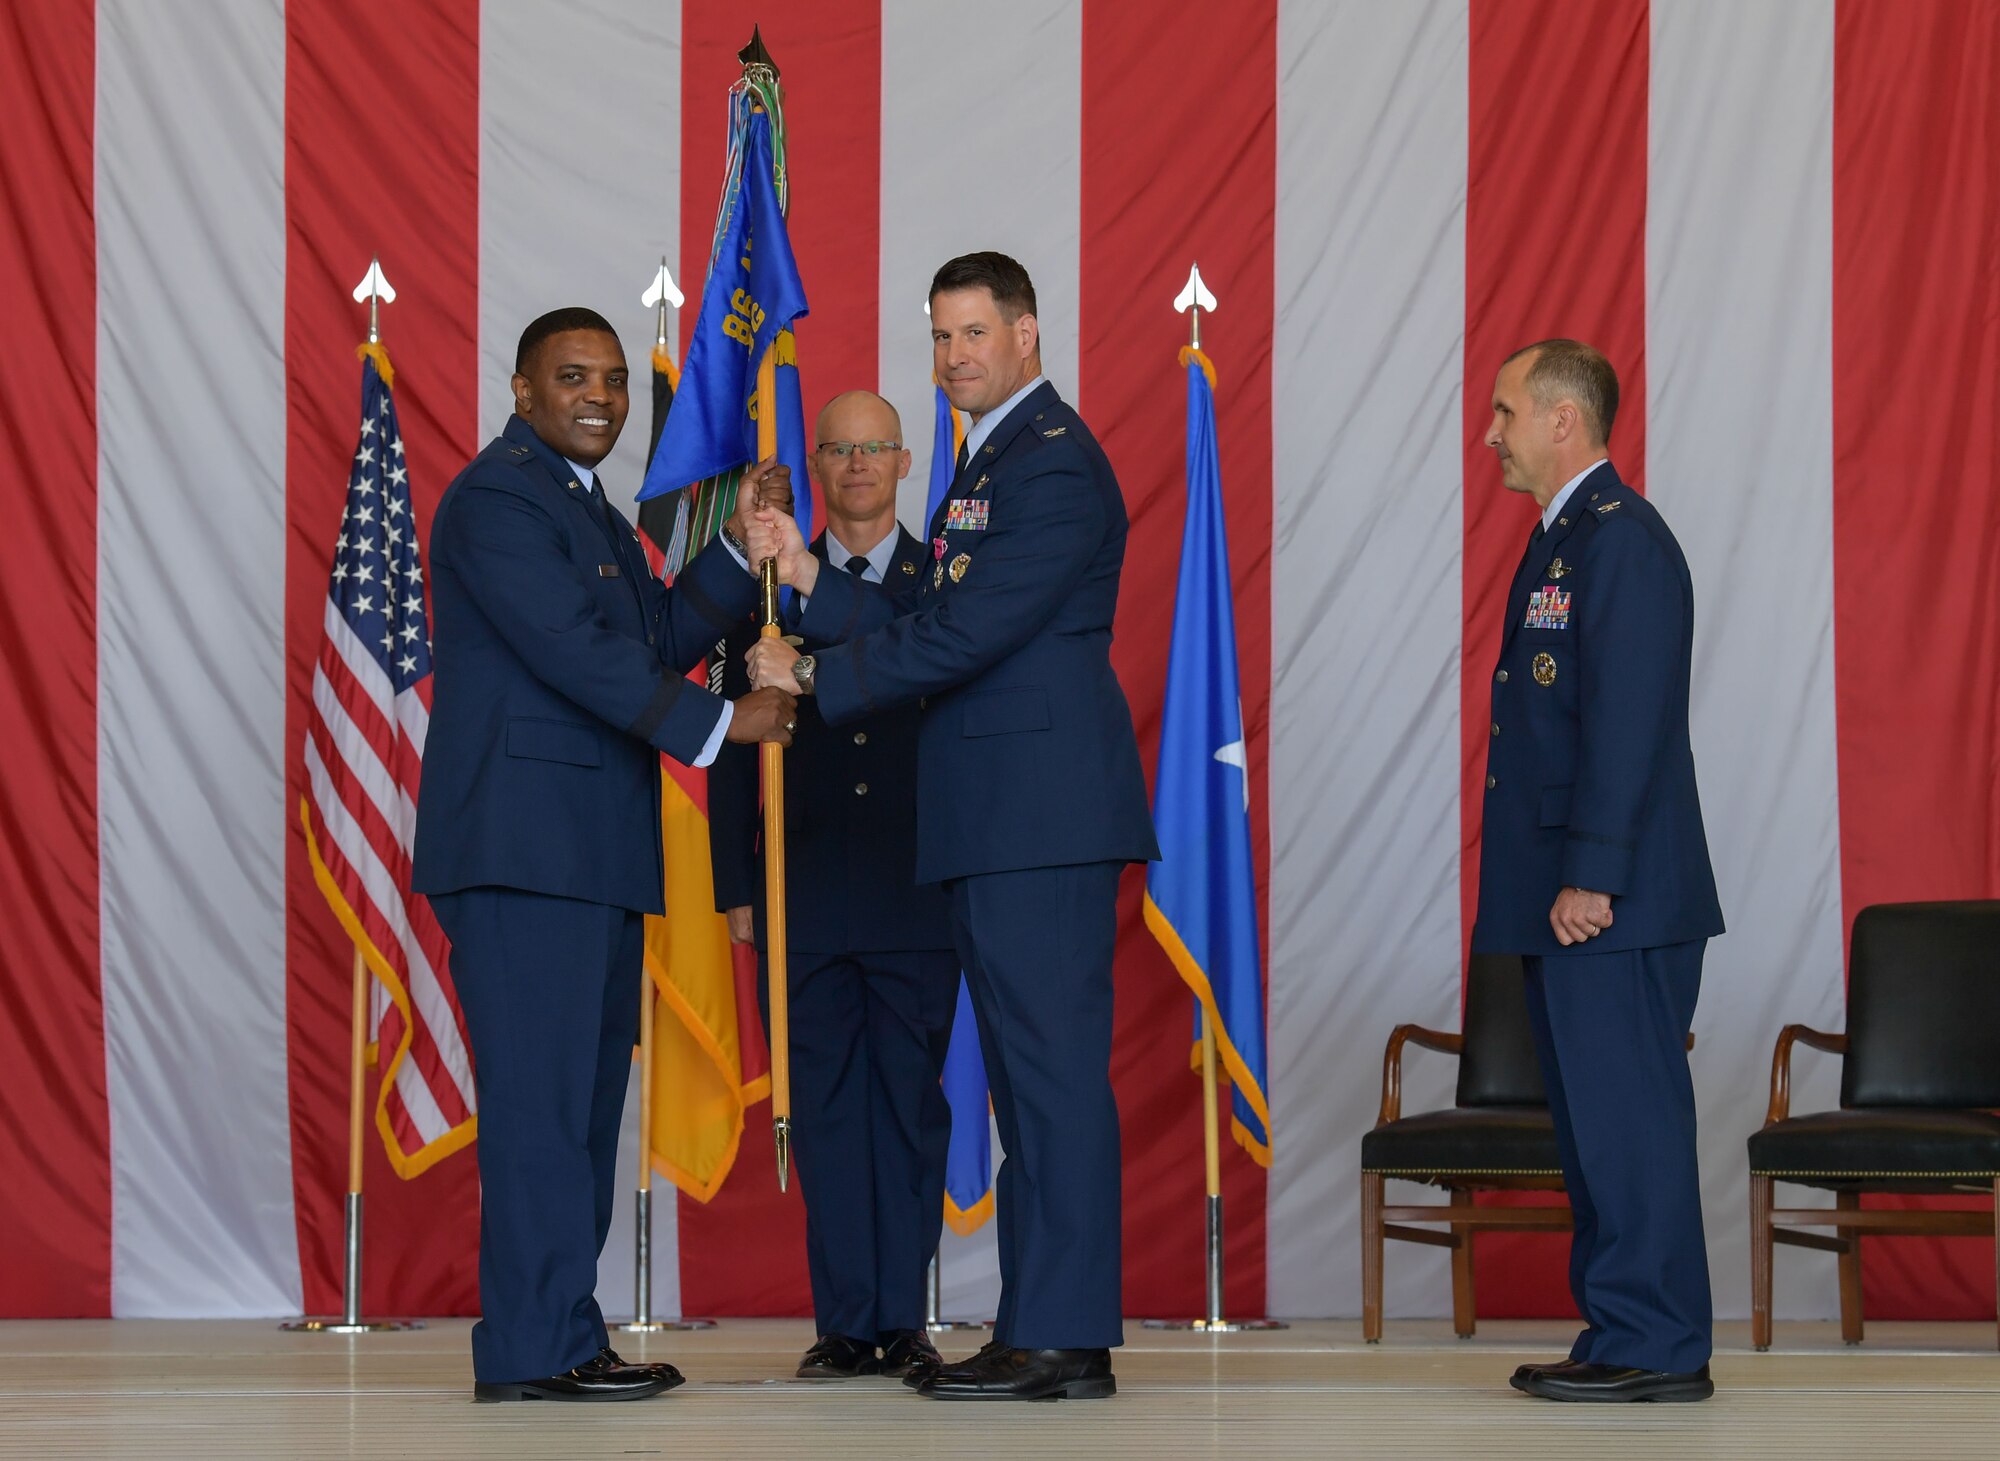 U.S. Air Force Col. Sean Finnan, 86th Operations Group out-going commander, middle, passes the 86th OG guidon to Brig. Gen. Otis C. Jones, 86th Airlift Wing commander, left, during the 86th OG change of command ceremony at Ramstein Air Base, Germany, June 15, 2023. Finnan is retiring after serving 25 years in the Air Force. (U.S. Air Force photo by Airman Trevor Calvert)